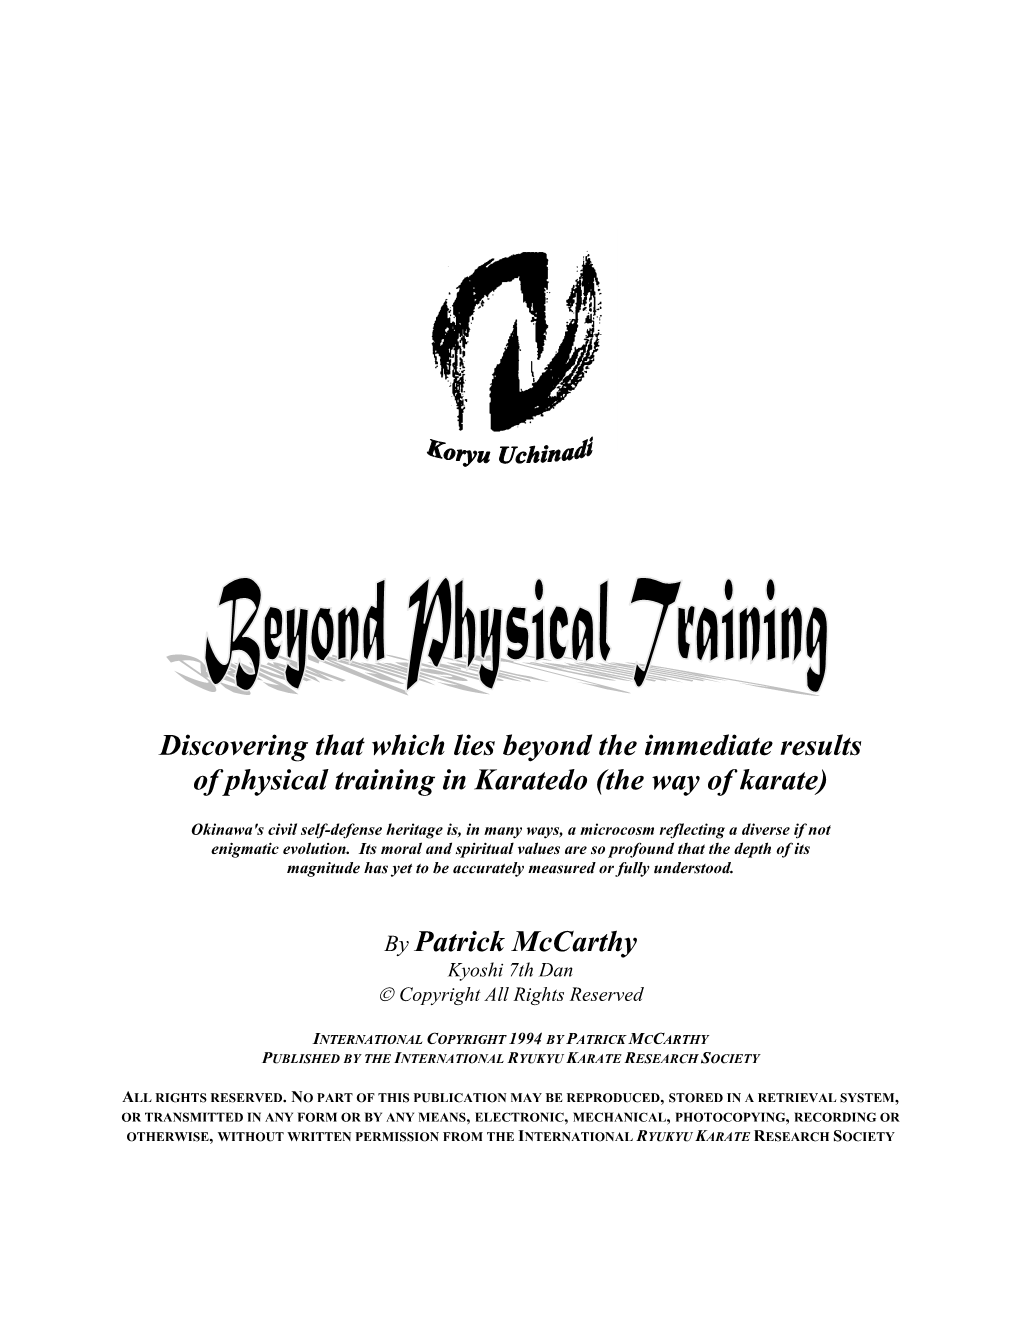 Discovering That Which Lies Beyond the Immediate Results of Physical Training in Karatedo (The Way of Karate)